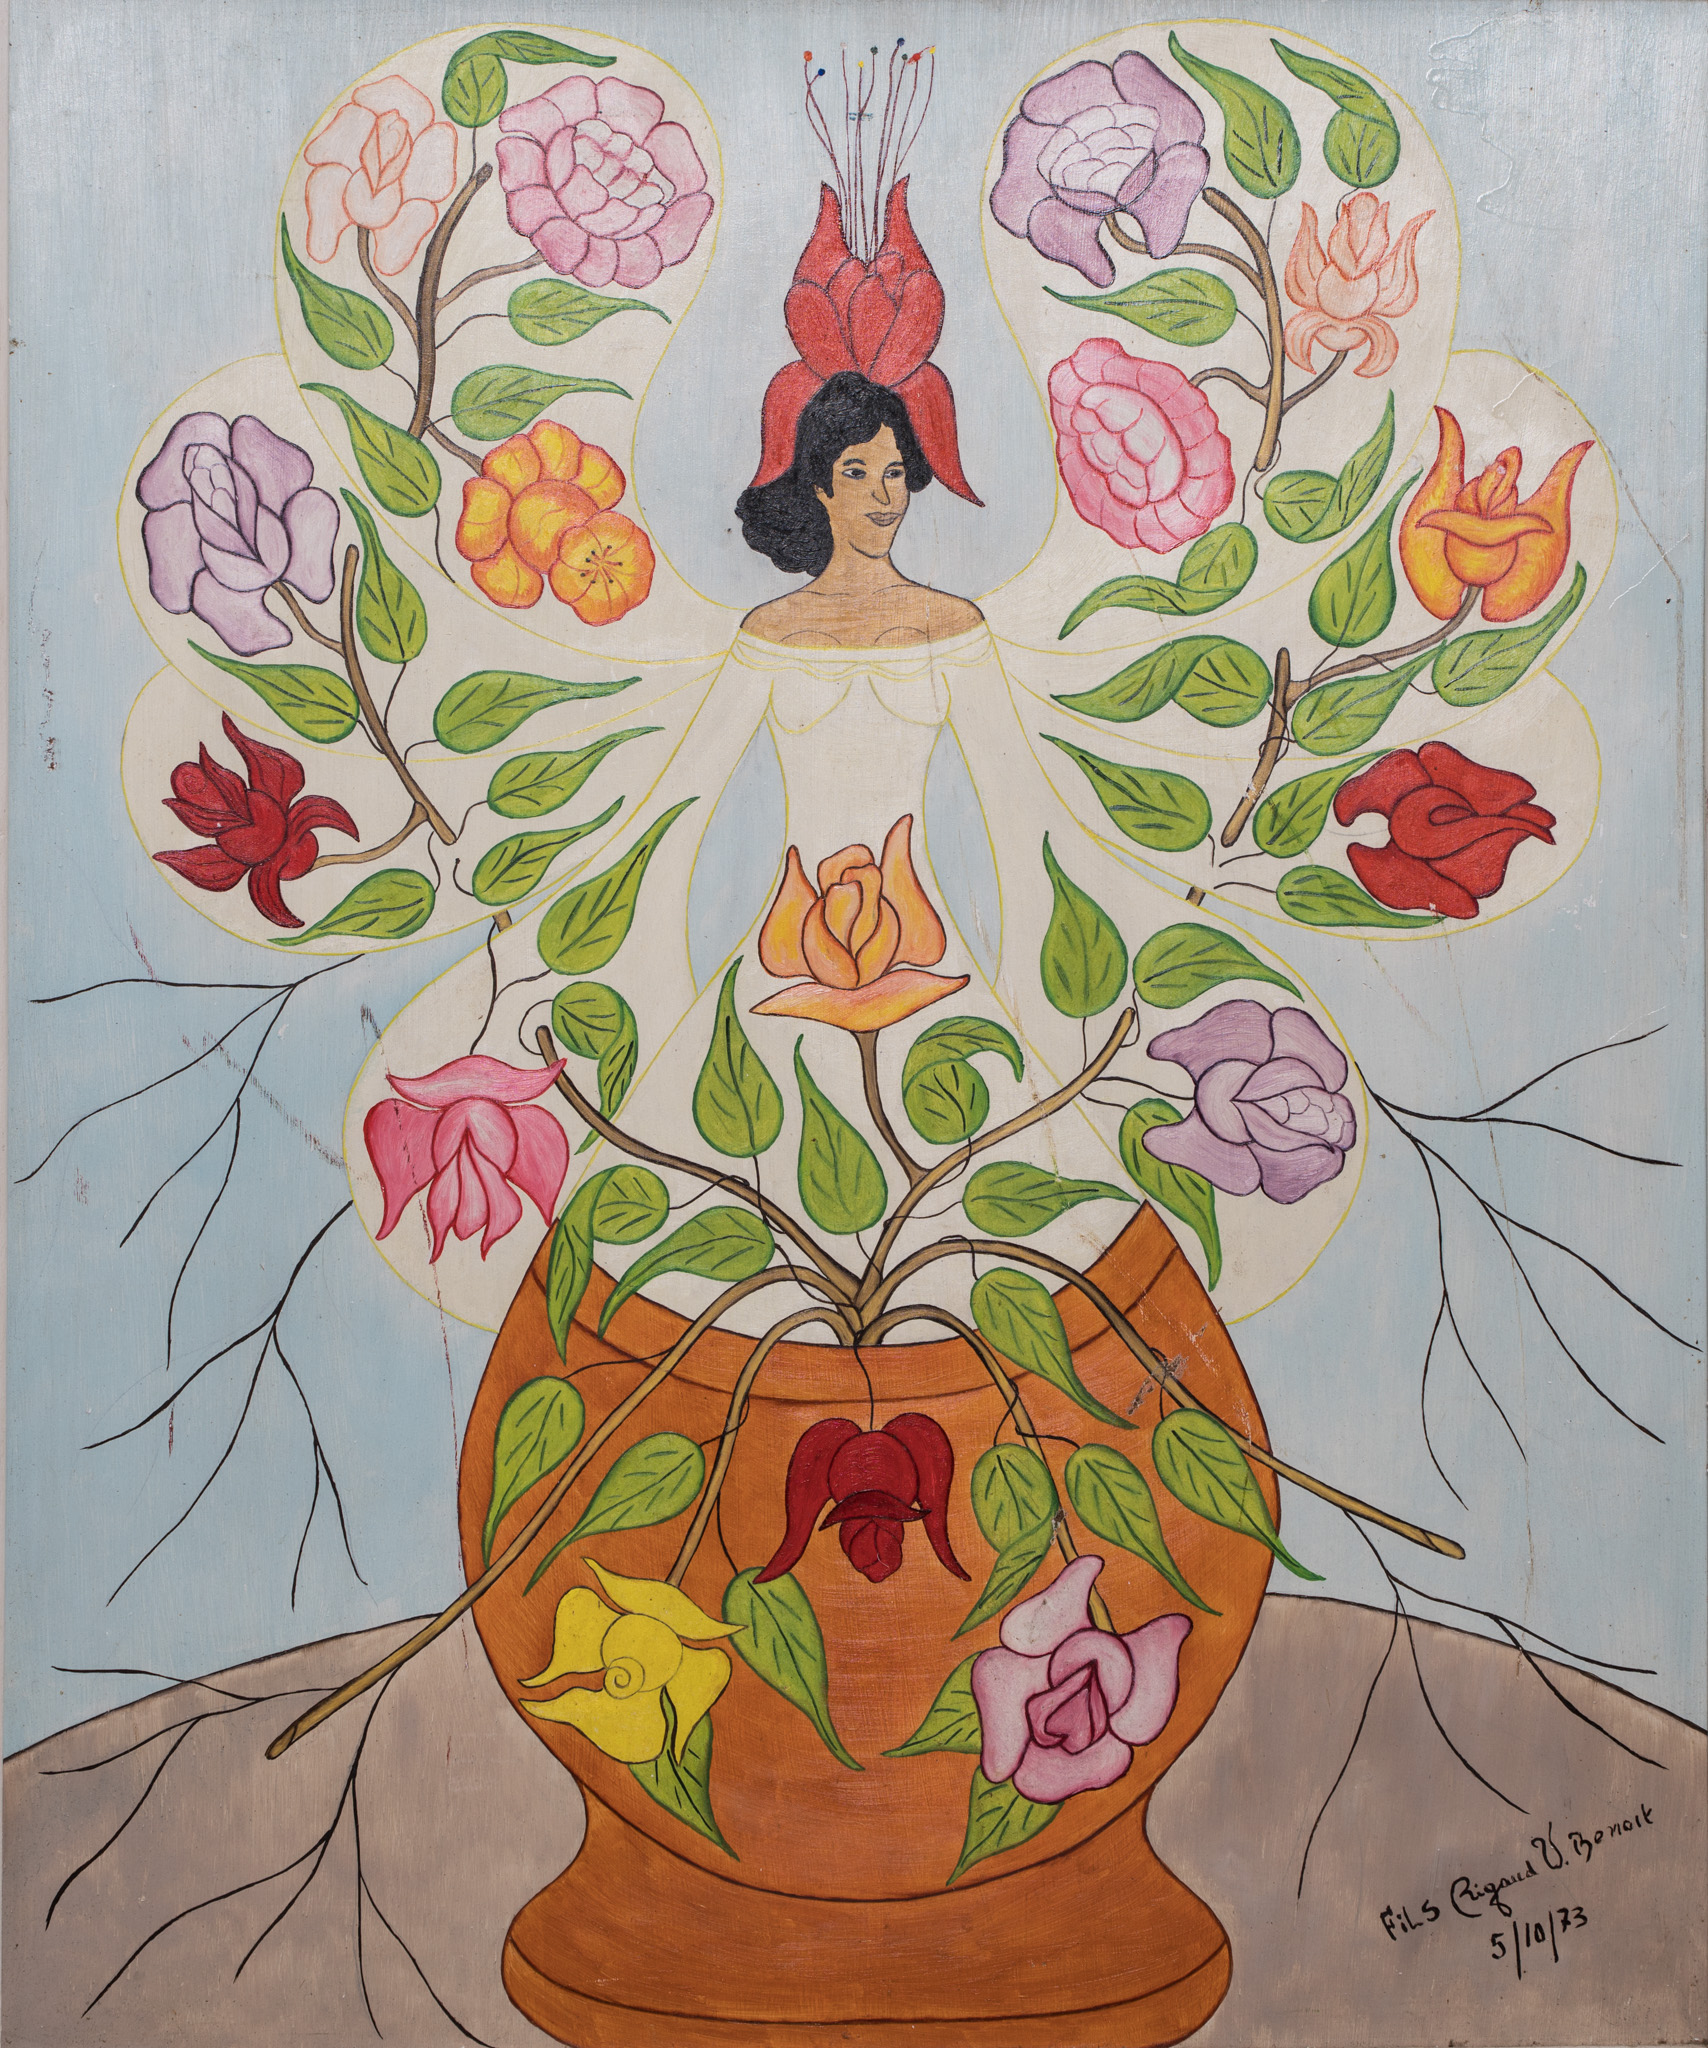 Woman in vase with flowers, 1973.